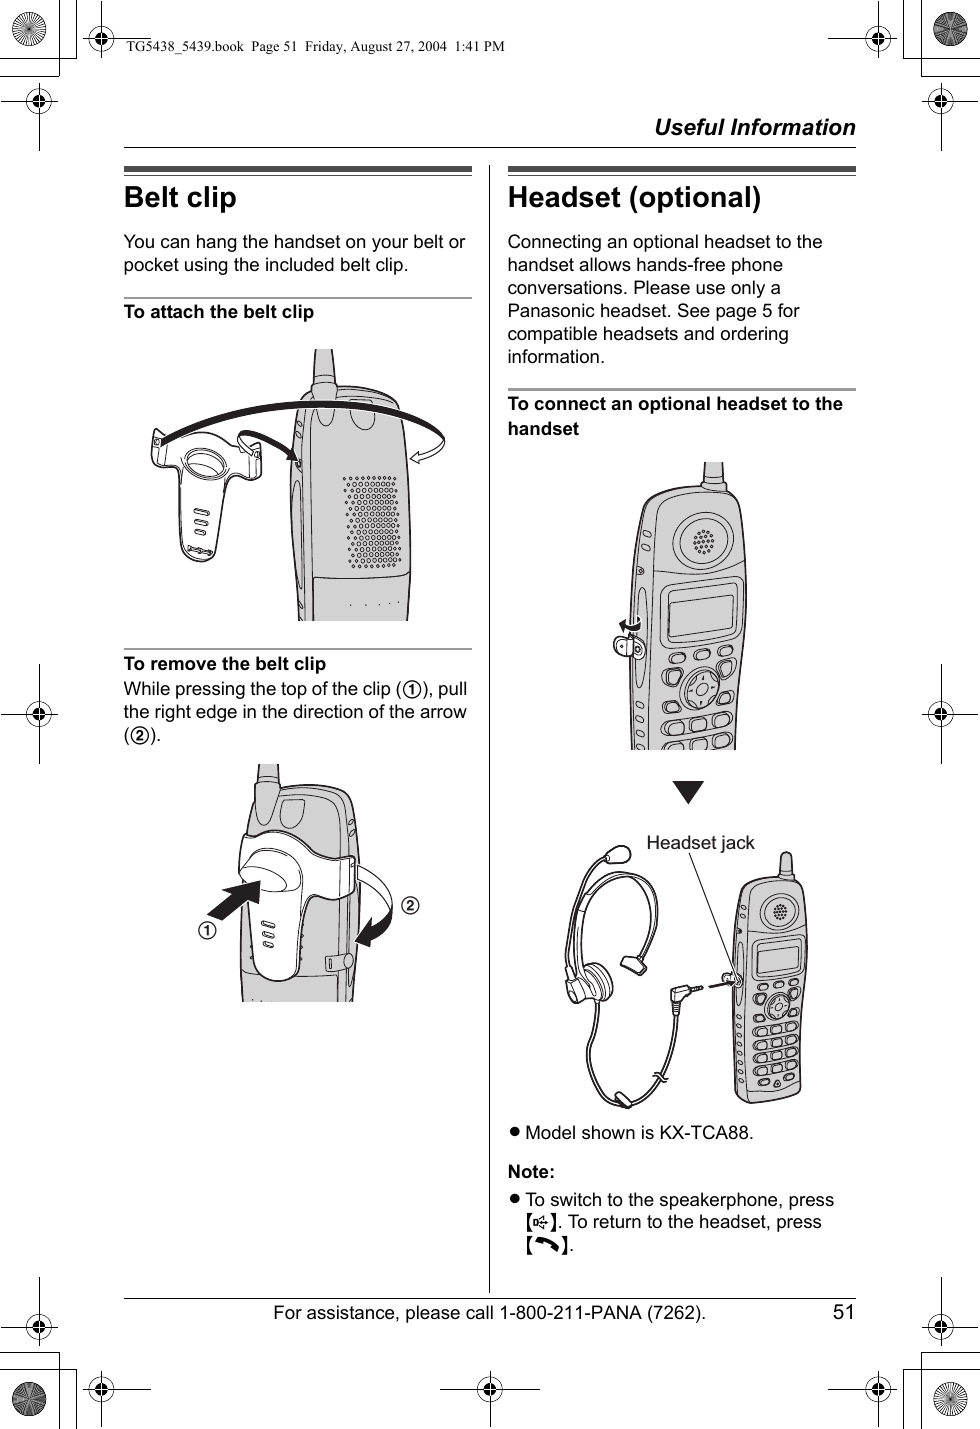 Useful InformationFor assistance, please call 1-800-211-PANA (7262). 51Belt clipYou can hang the handset on your belt or pocket using the included belt clip.To attach the belt clipTo remove the belt clipWhile pressing the top of the clip (1), pull the right edge in the direction of the arrow (2).Headset (optional)Connecting an optional headset to the handset allows hands-free phone conversations. Please use only a Panasonic headset. See page 5 for compatible headsets and ordering information.To connect an optional headset to the handsetLModel shown is KX-TCA88.Note:LTo switch to the speakerphone, press {s}. To return to the headset, press {C}.12Headset jackTG5438_5439.book  Page 51  Friday, August 27, 2004  1:41 PM